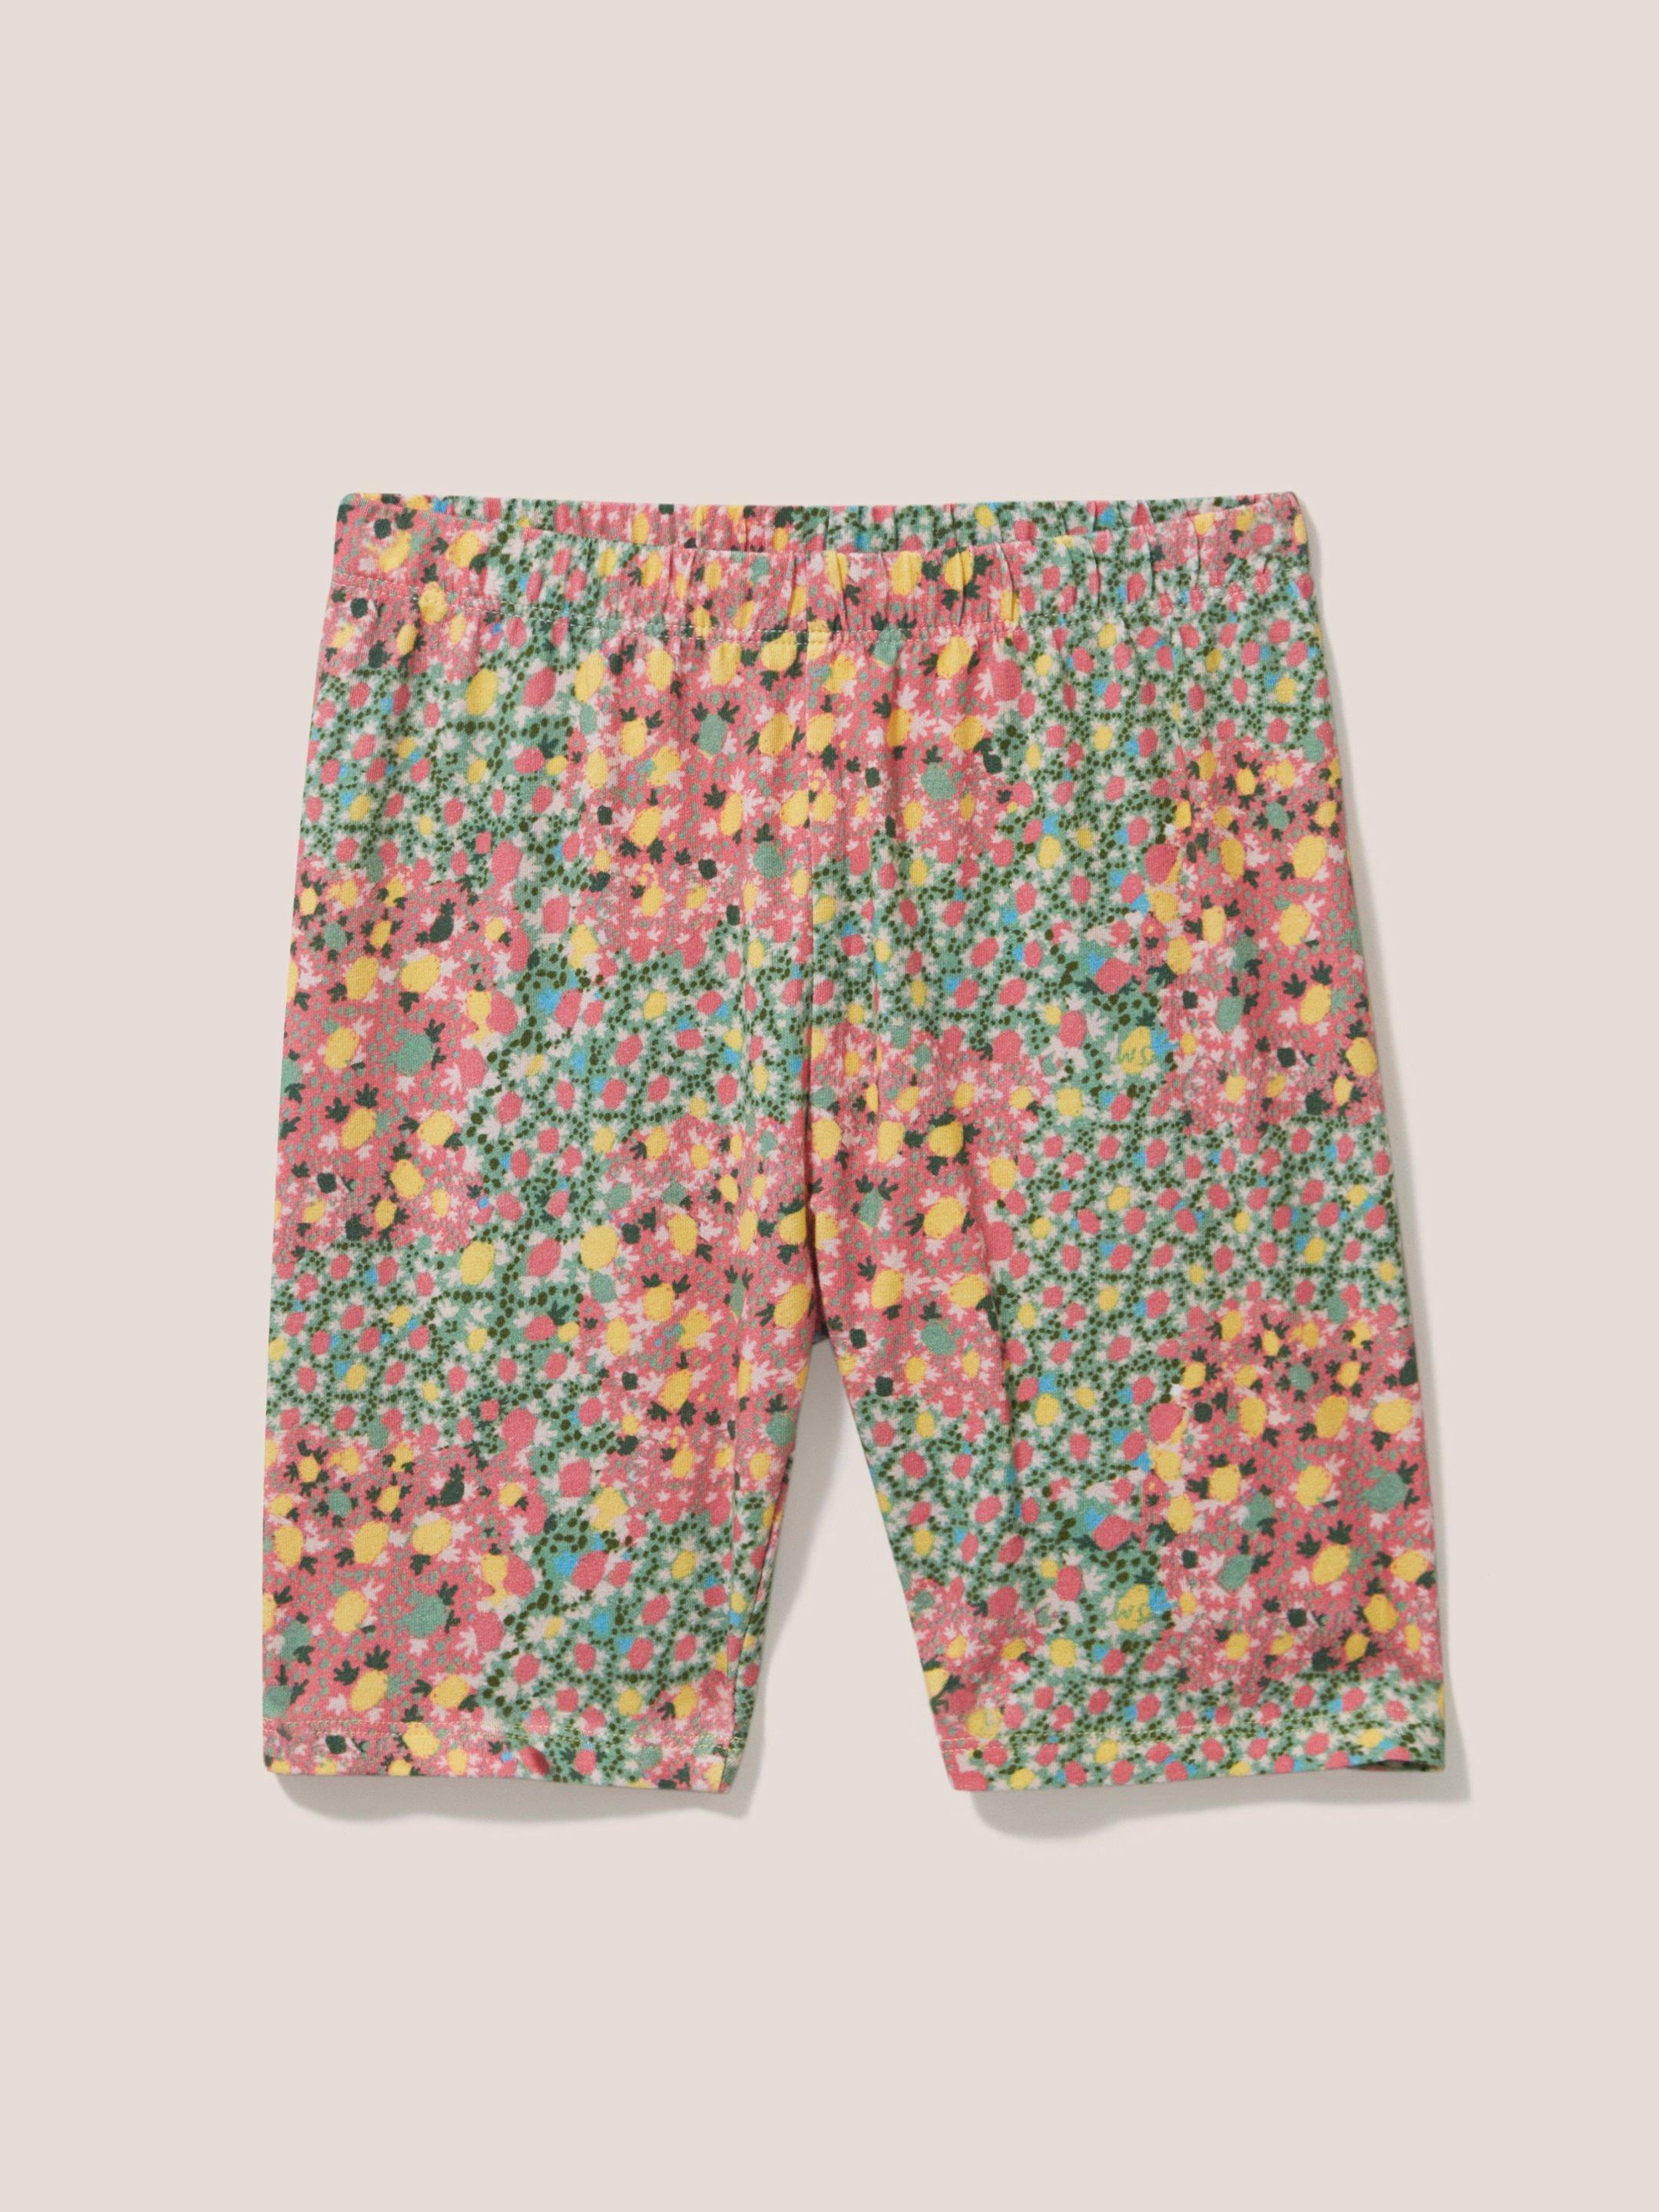 Printed Cycle Short in PINK MLT - FLAT FRONT